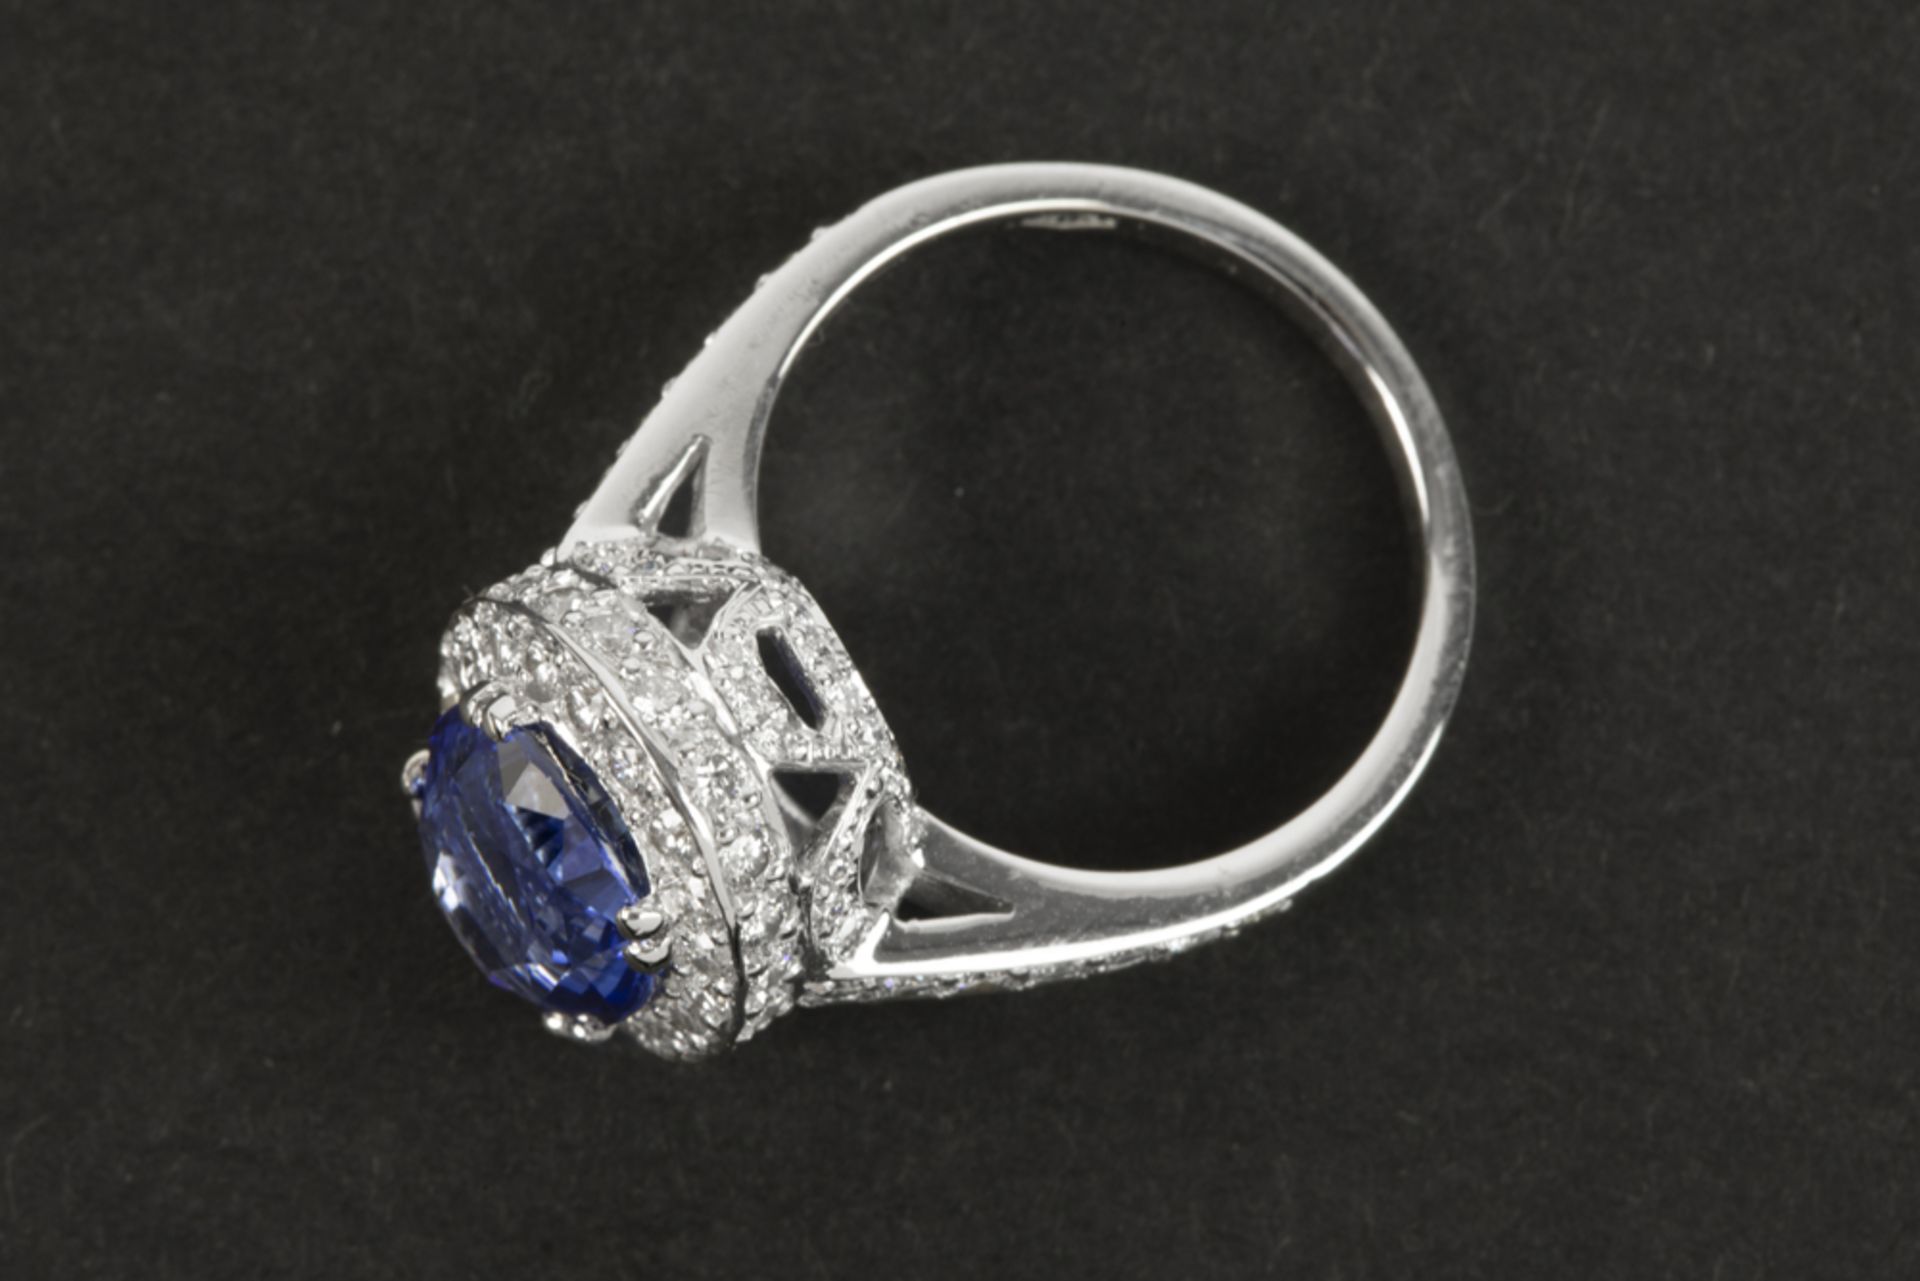 beautiful ring in white gold (18 carat) with a superb intense blue sapphire of 4,98 carat from - Image 2 of 3